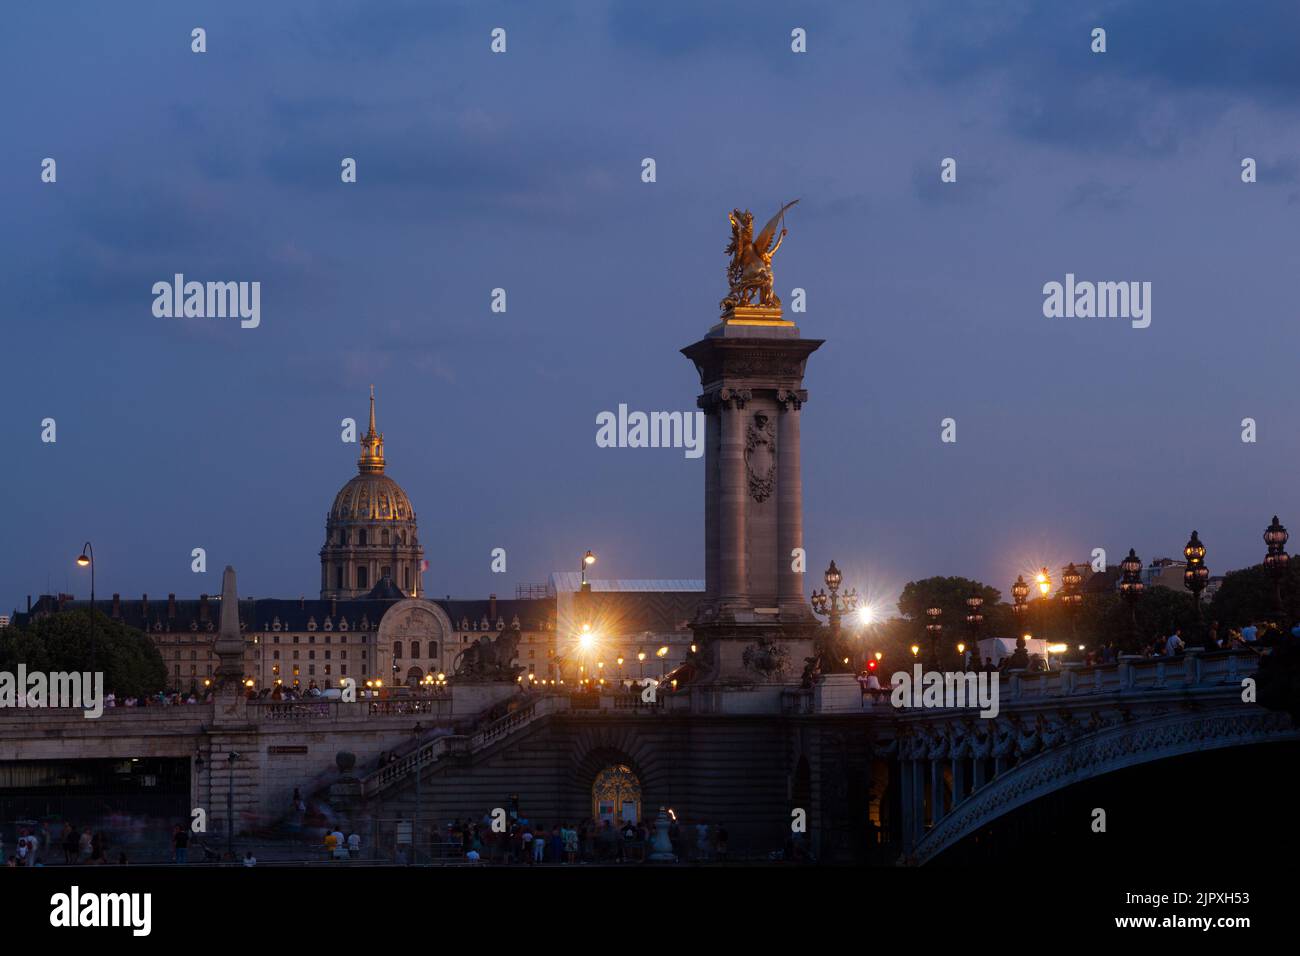 Pont Alexandre III Bridge and illuminated lamp posts at sunset with view of the Invalides. 7th Arrondissement, Paris, France Stock Photo